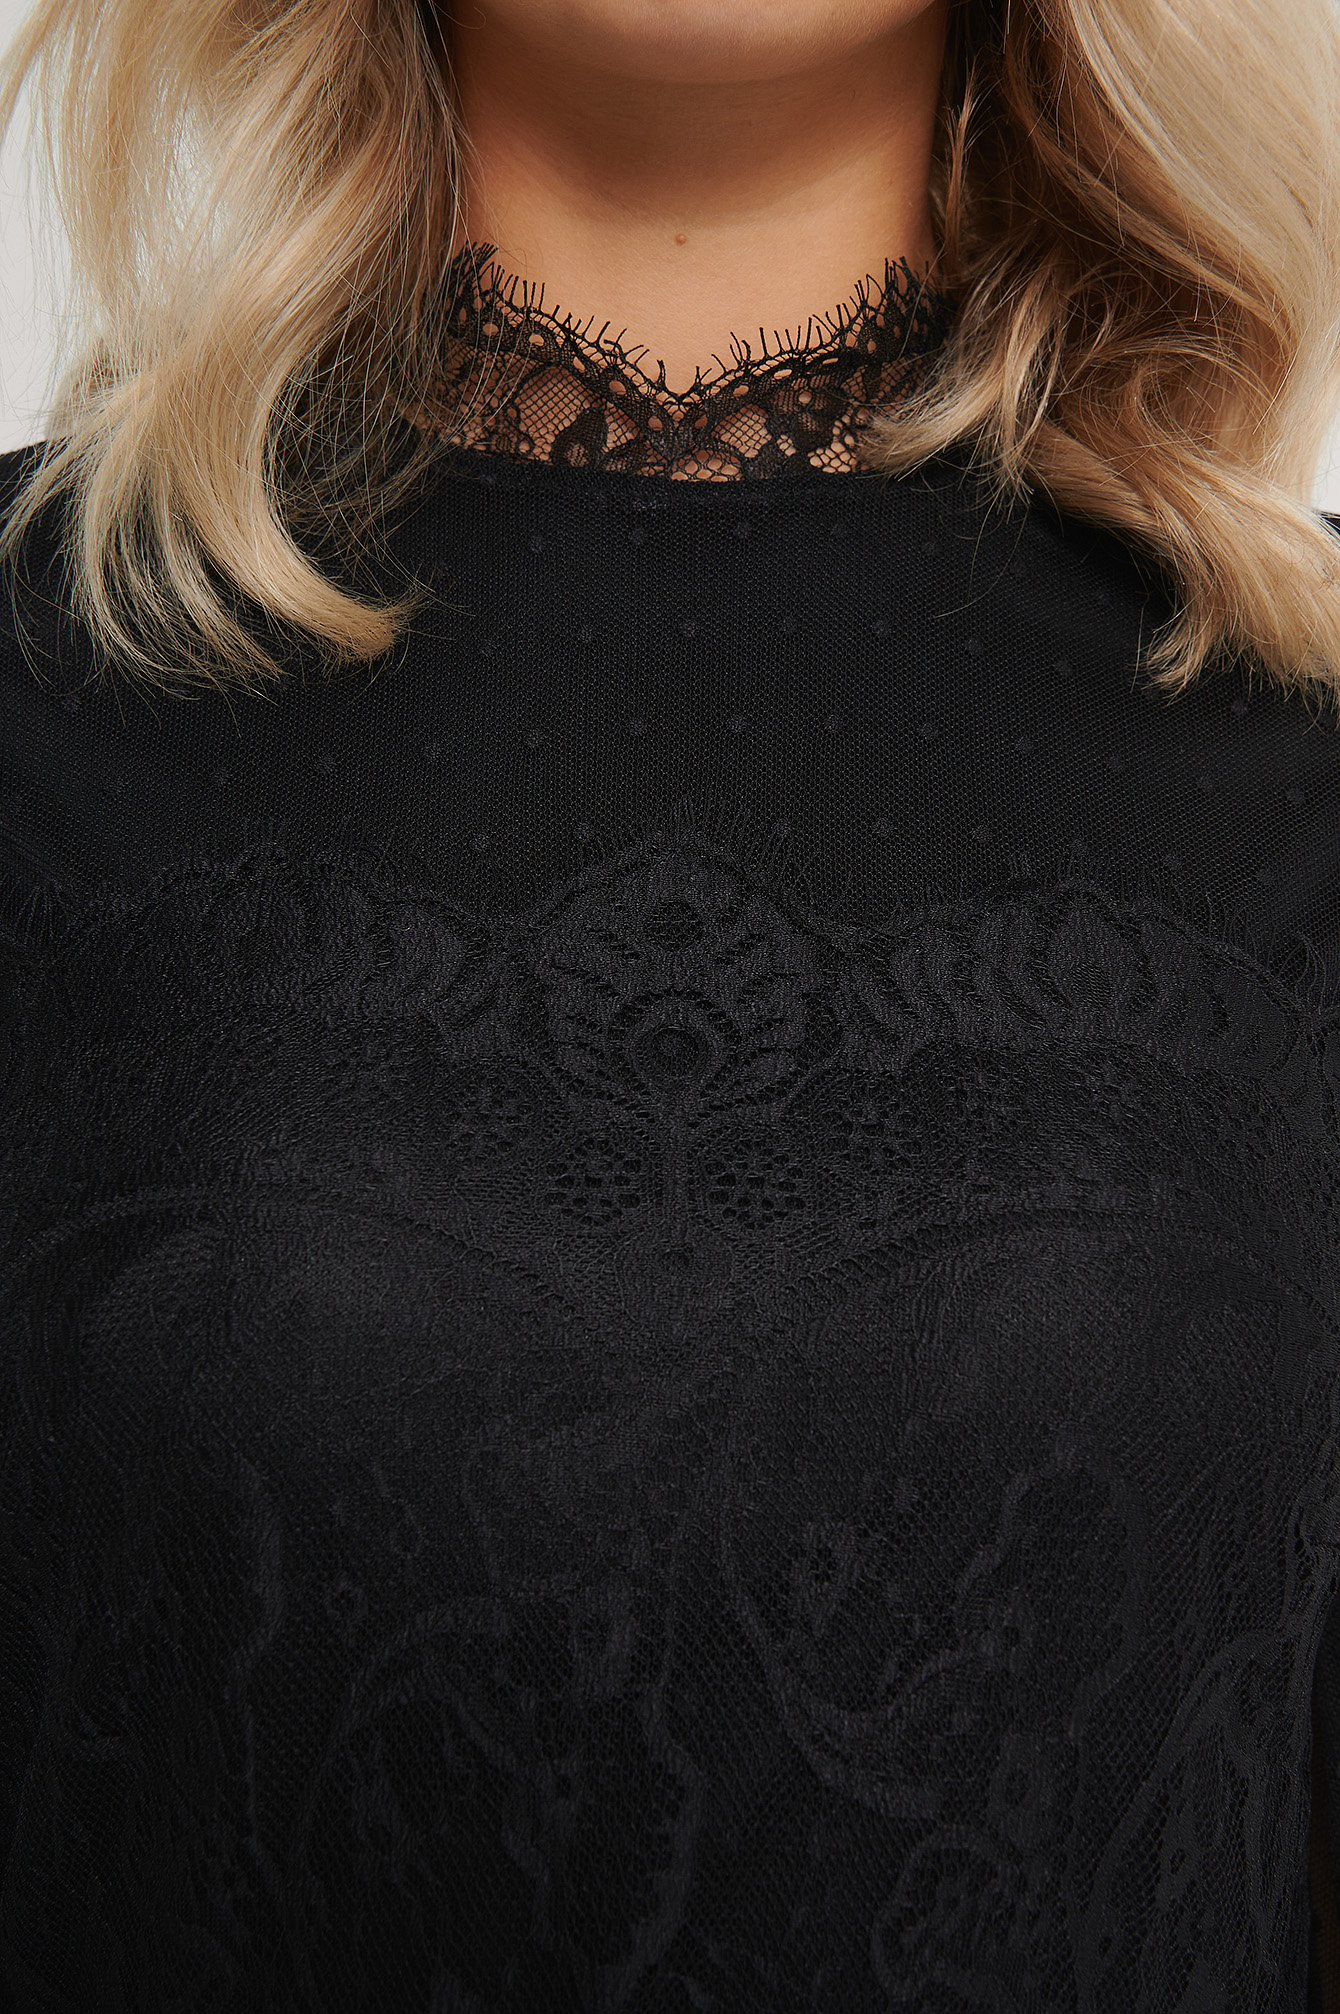 Black Frill Lace Top